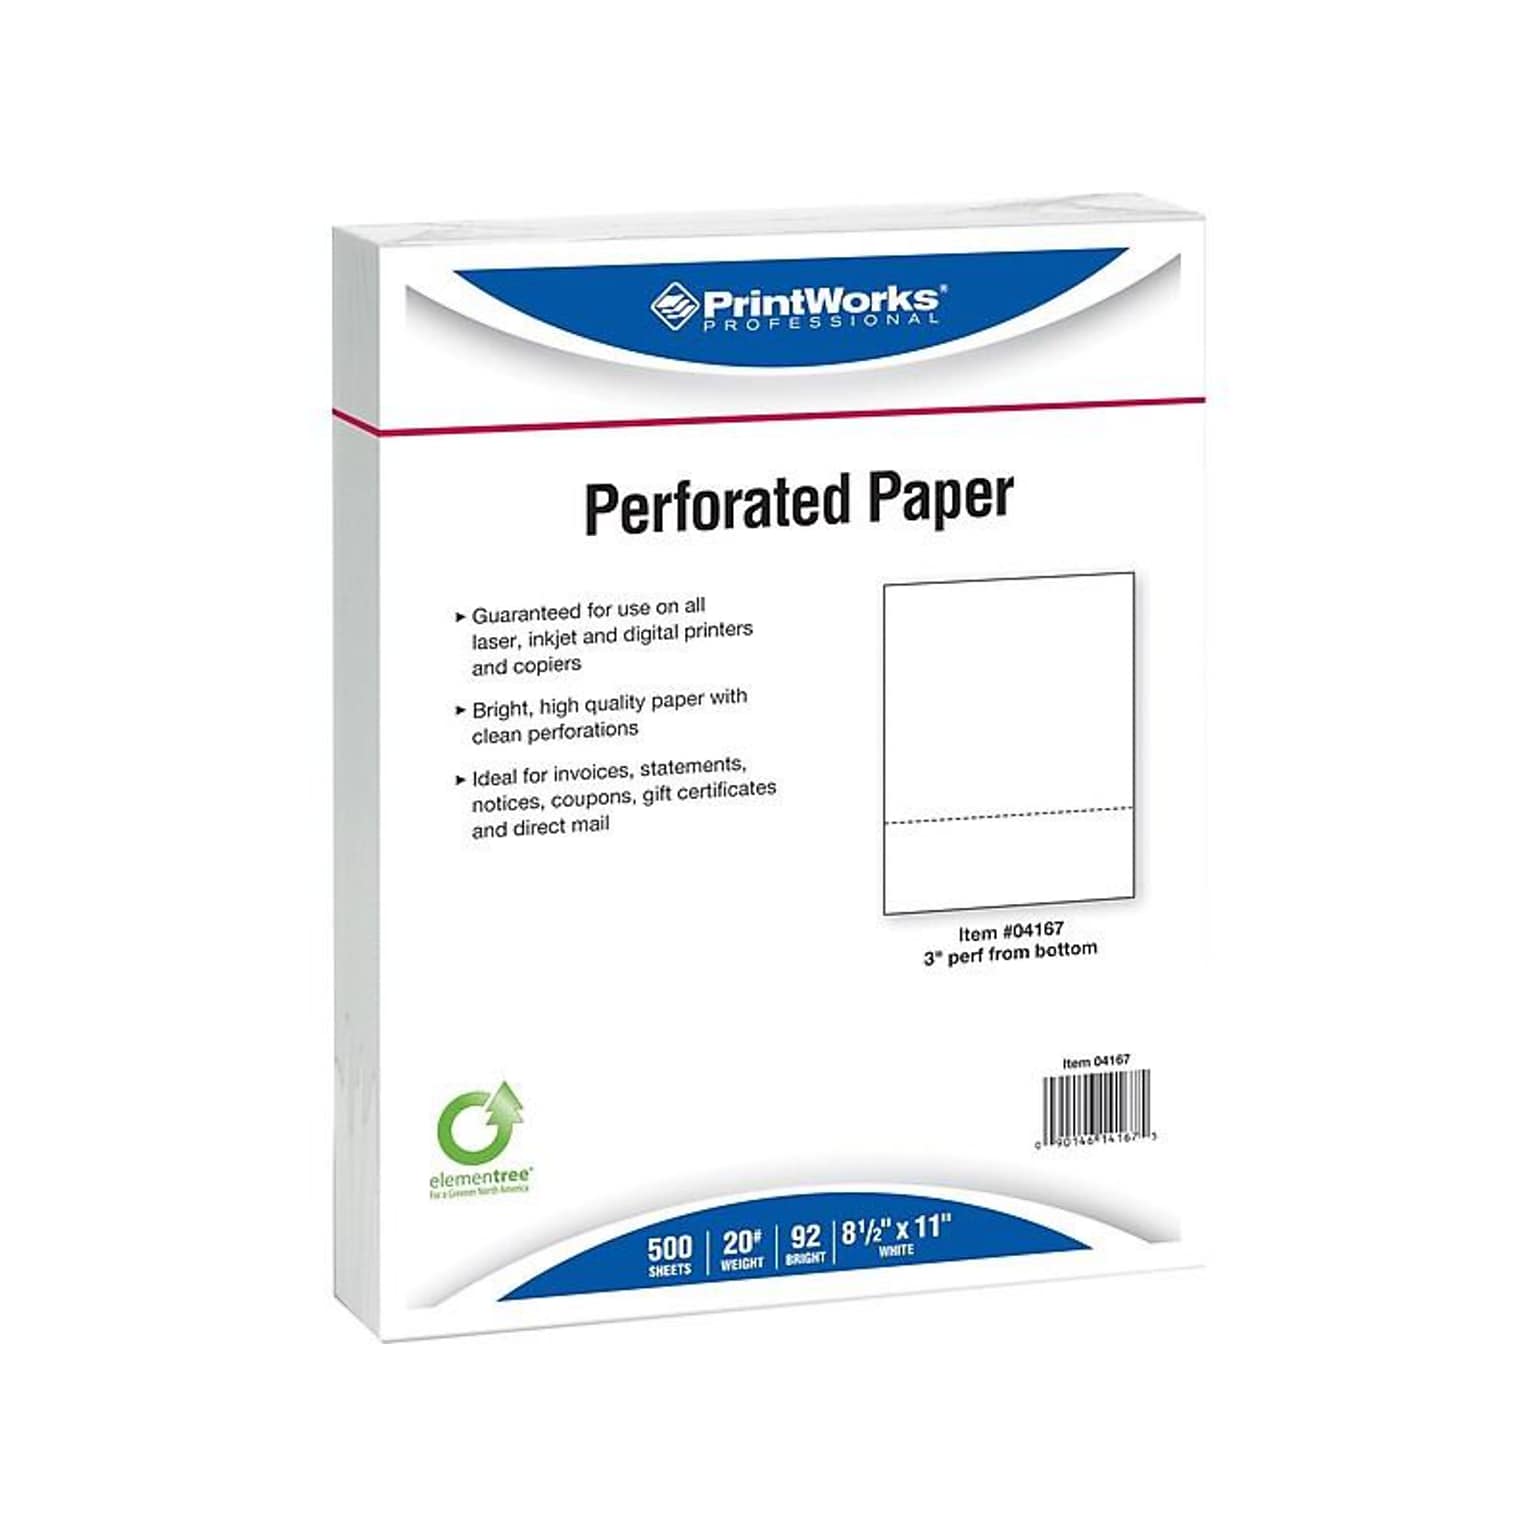 Printworks® Professional 8.5 x 11 Perforated Paper, 20 lbs., 92 Brightness, 2500 Sheets/Carton (04167)